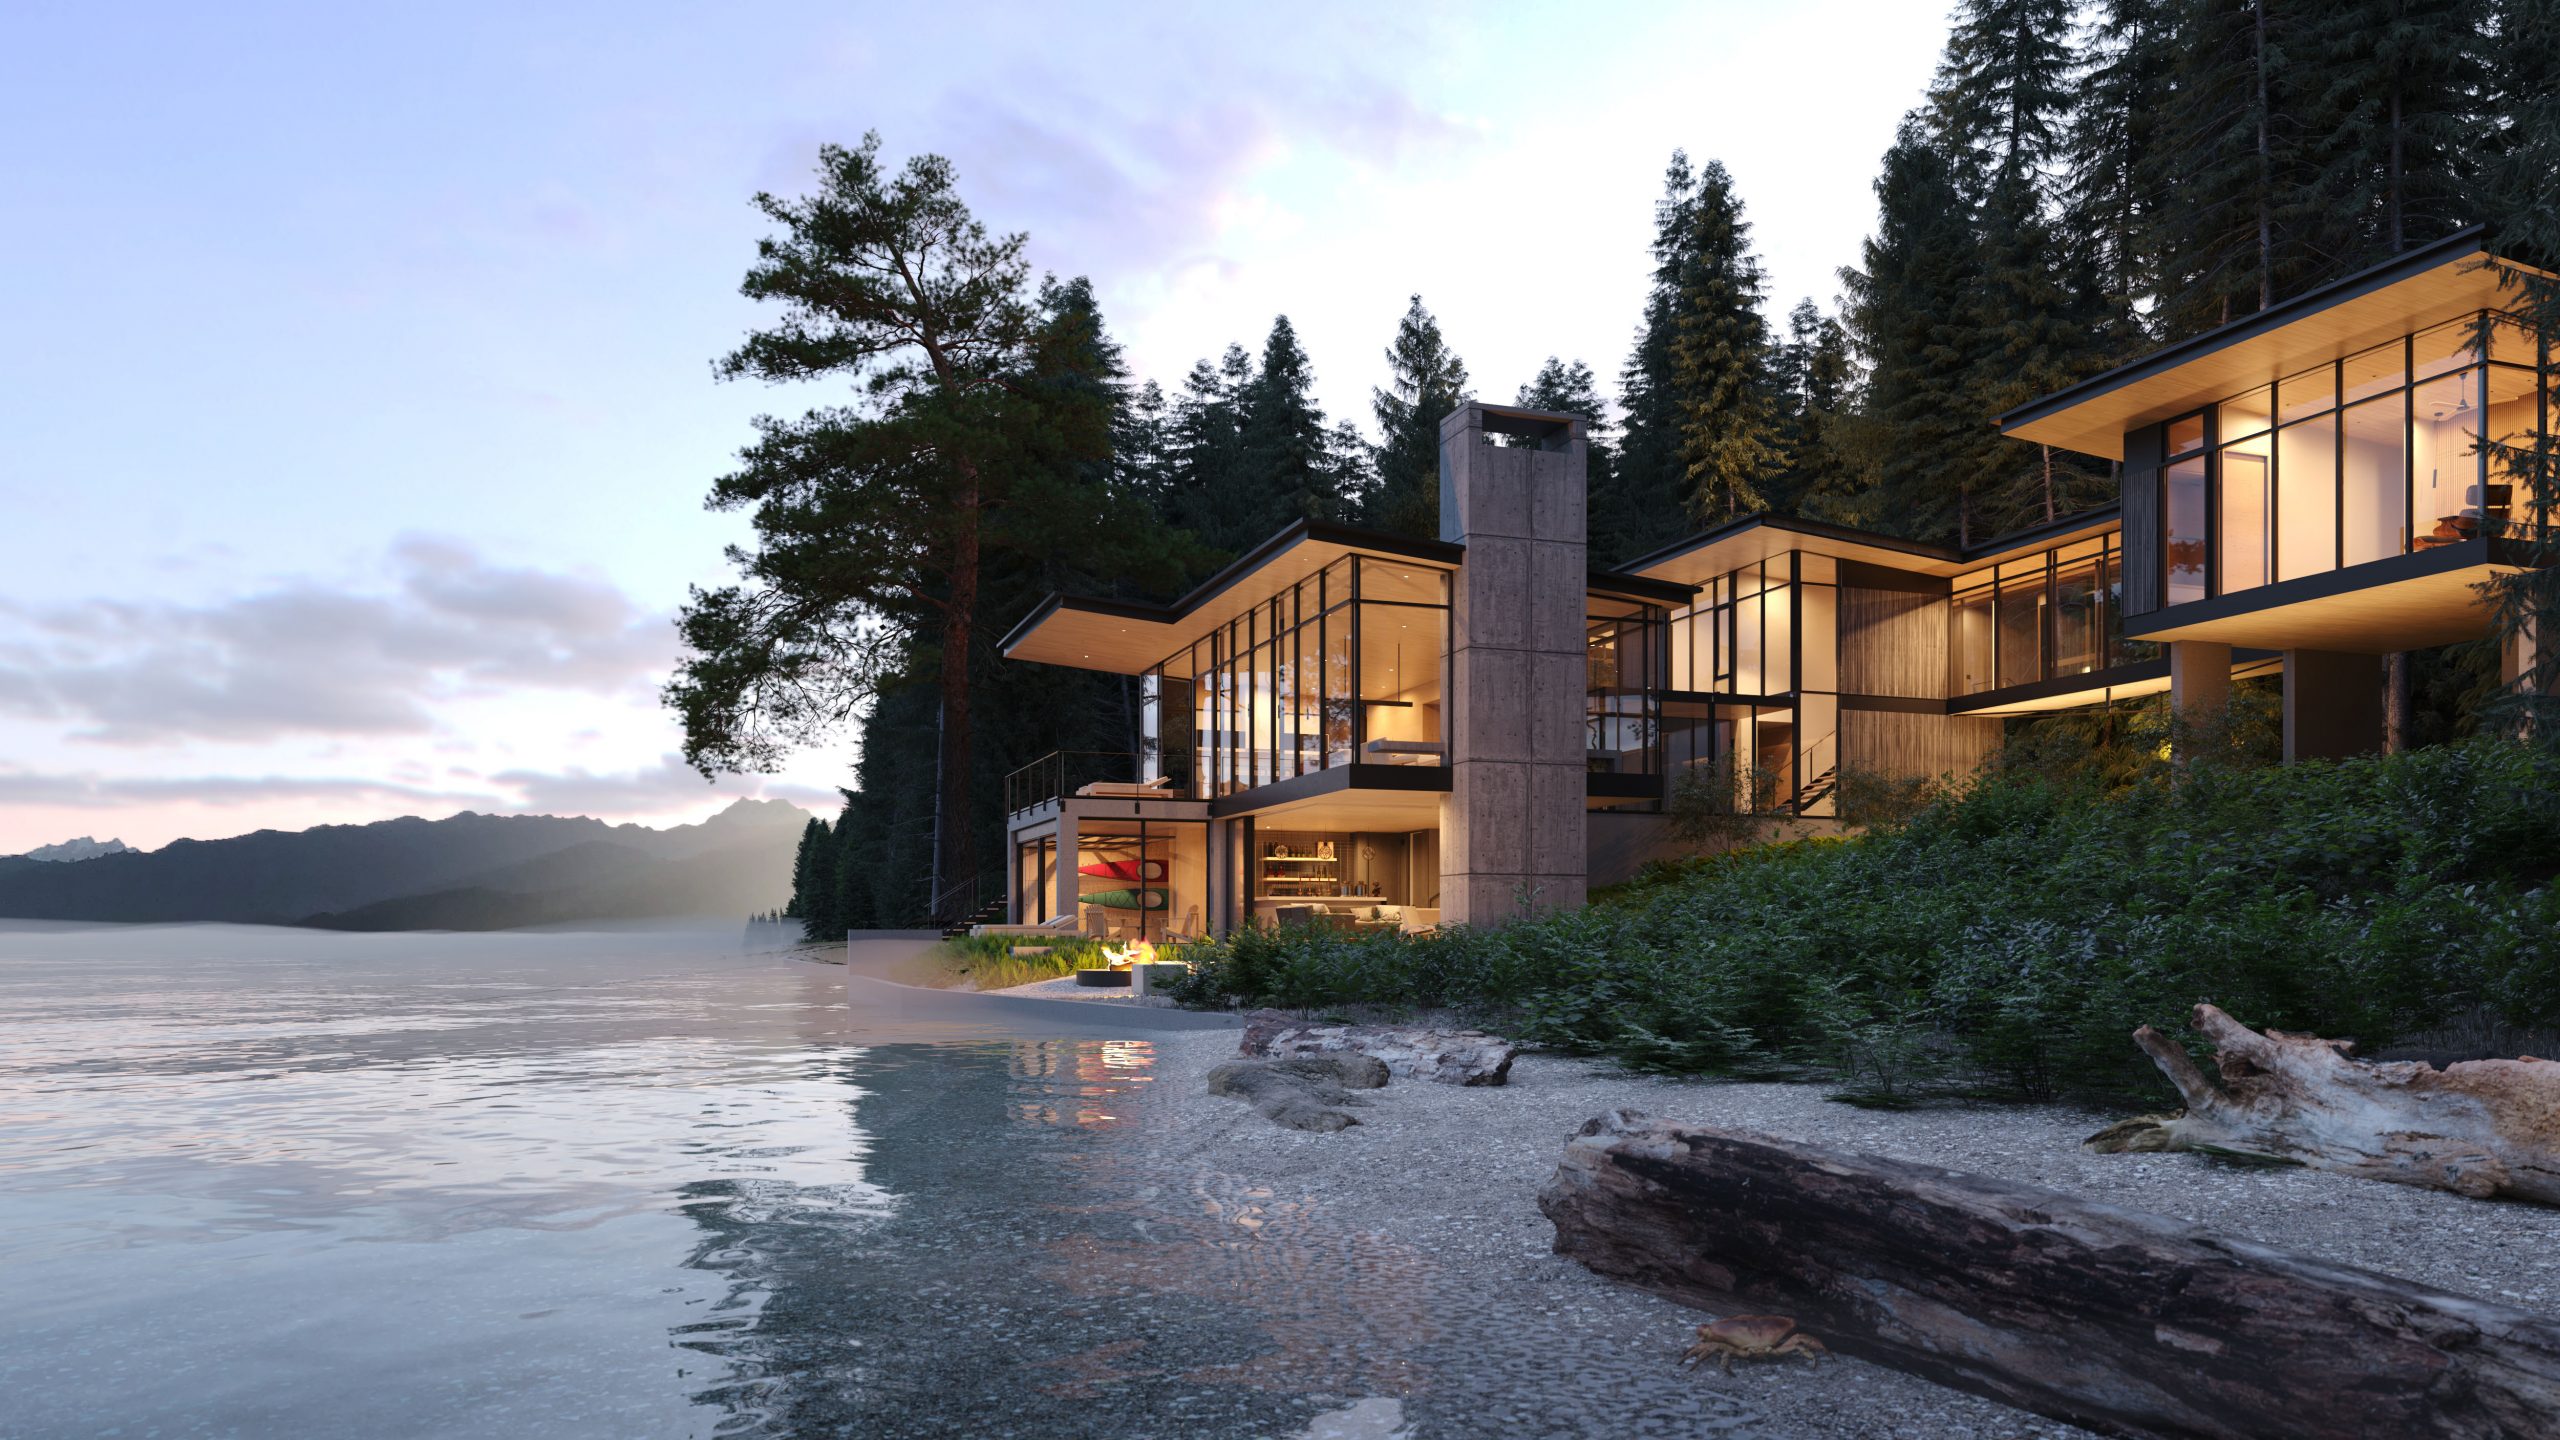 In 2018, a couple of Seattle-based architects – one formerly with Olson Kundig and the other once with Heliotrope – bailed on the Pacific Northwest and headed east for Idaho.